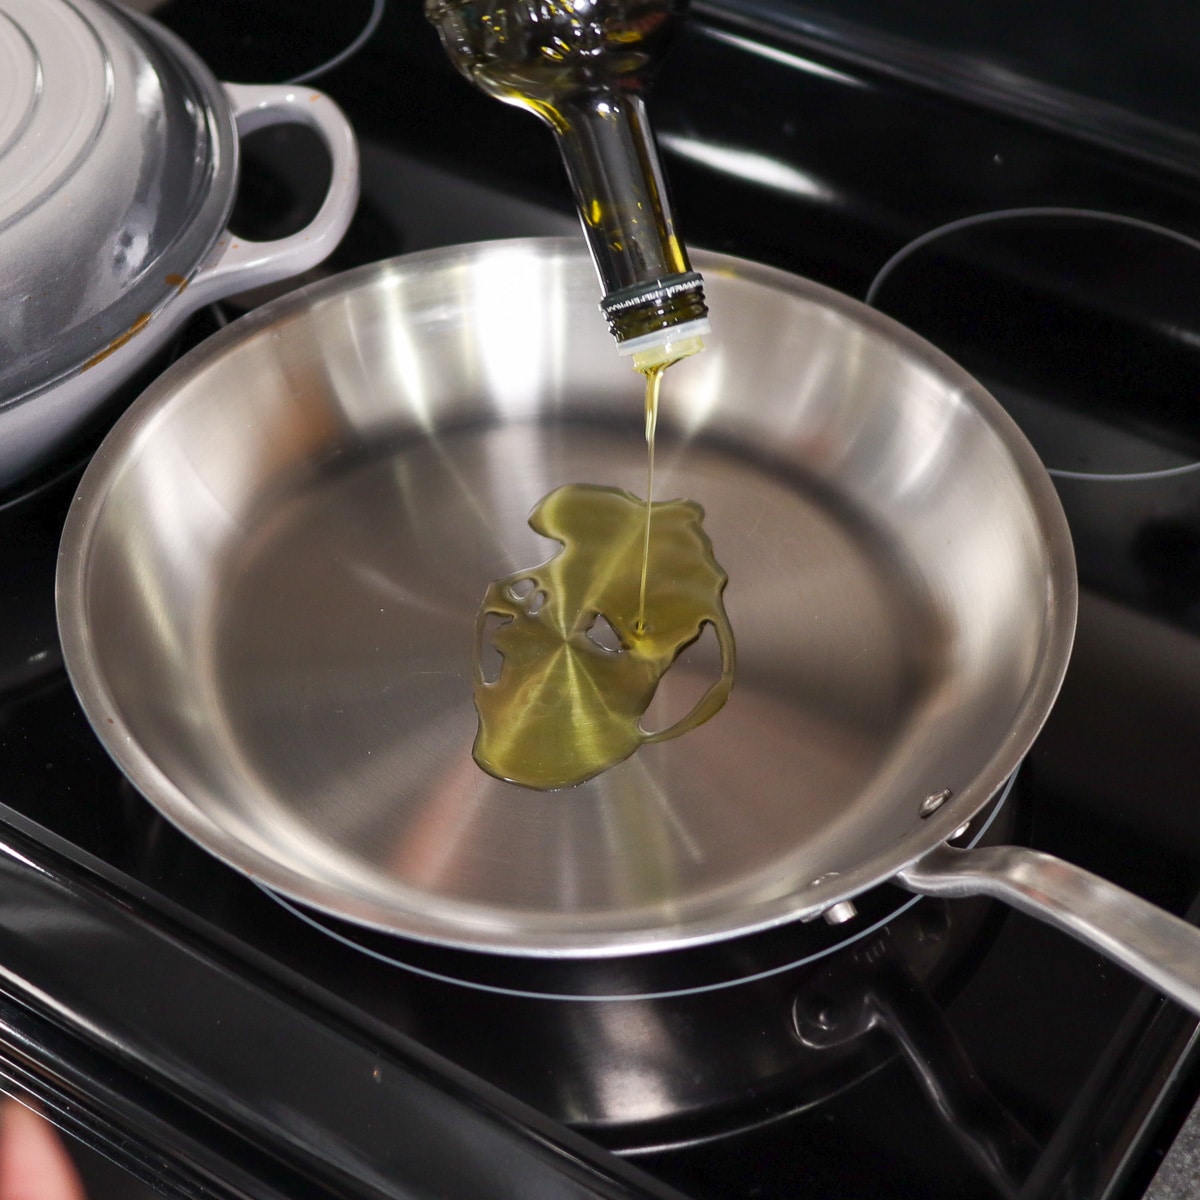 oil being added to frying pan